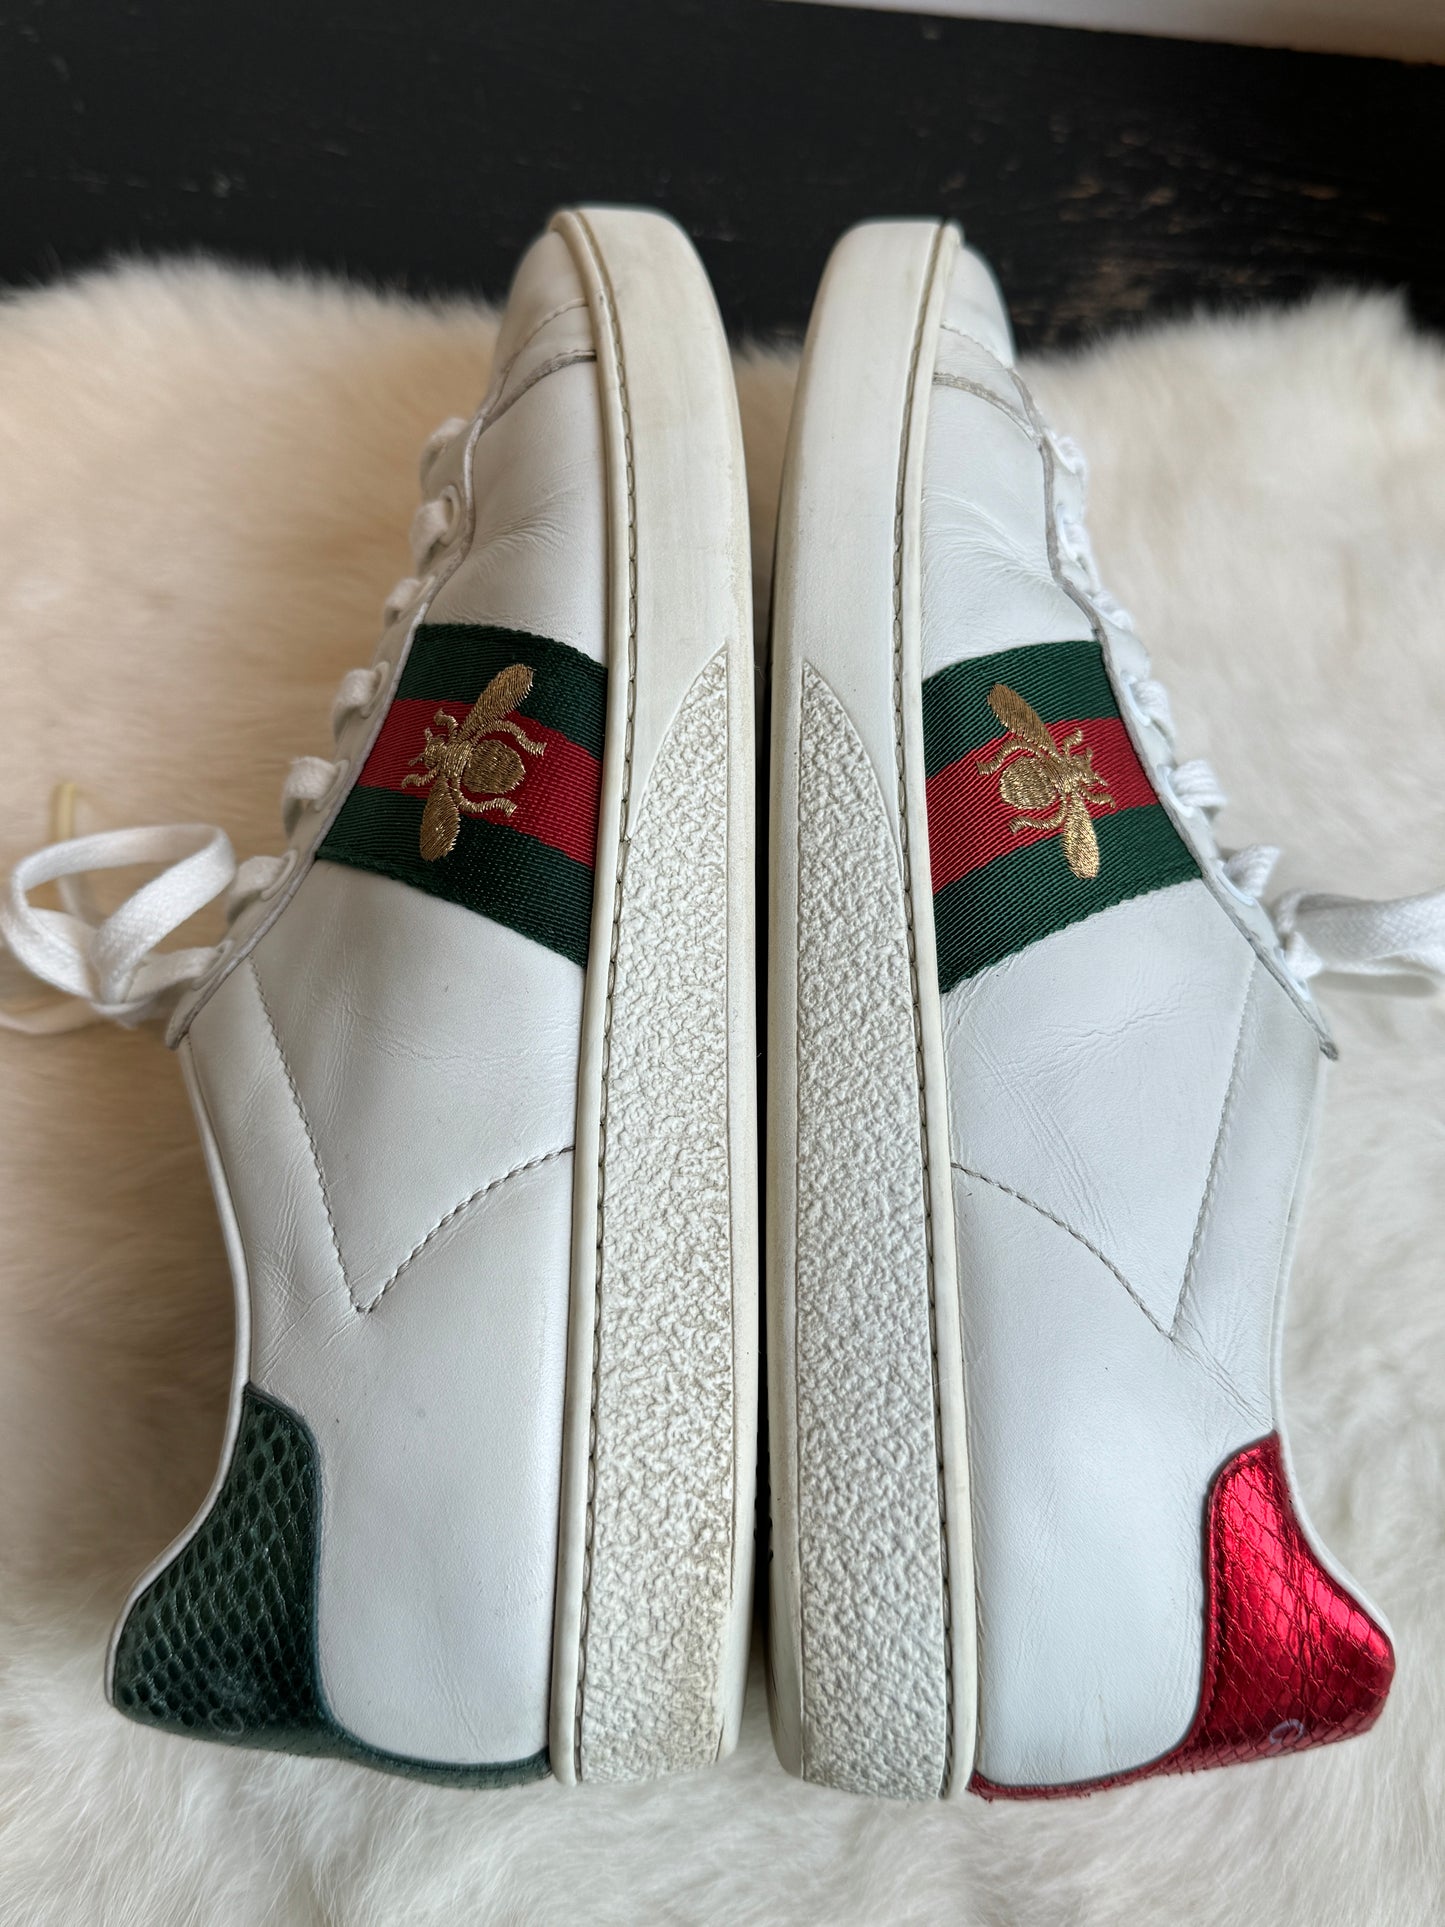 Gucci Ace Bees Sneakers Size 36.5EU